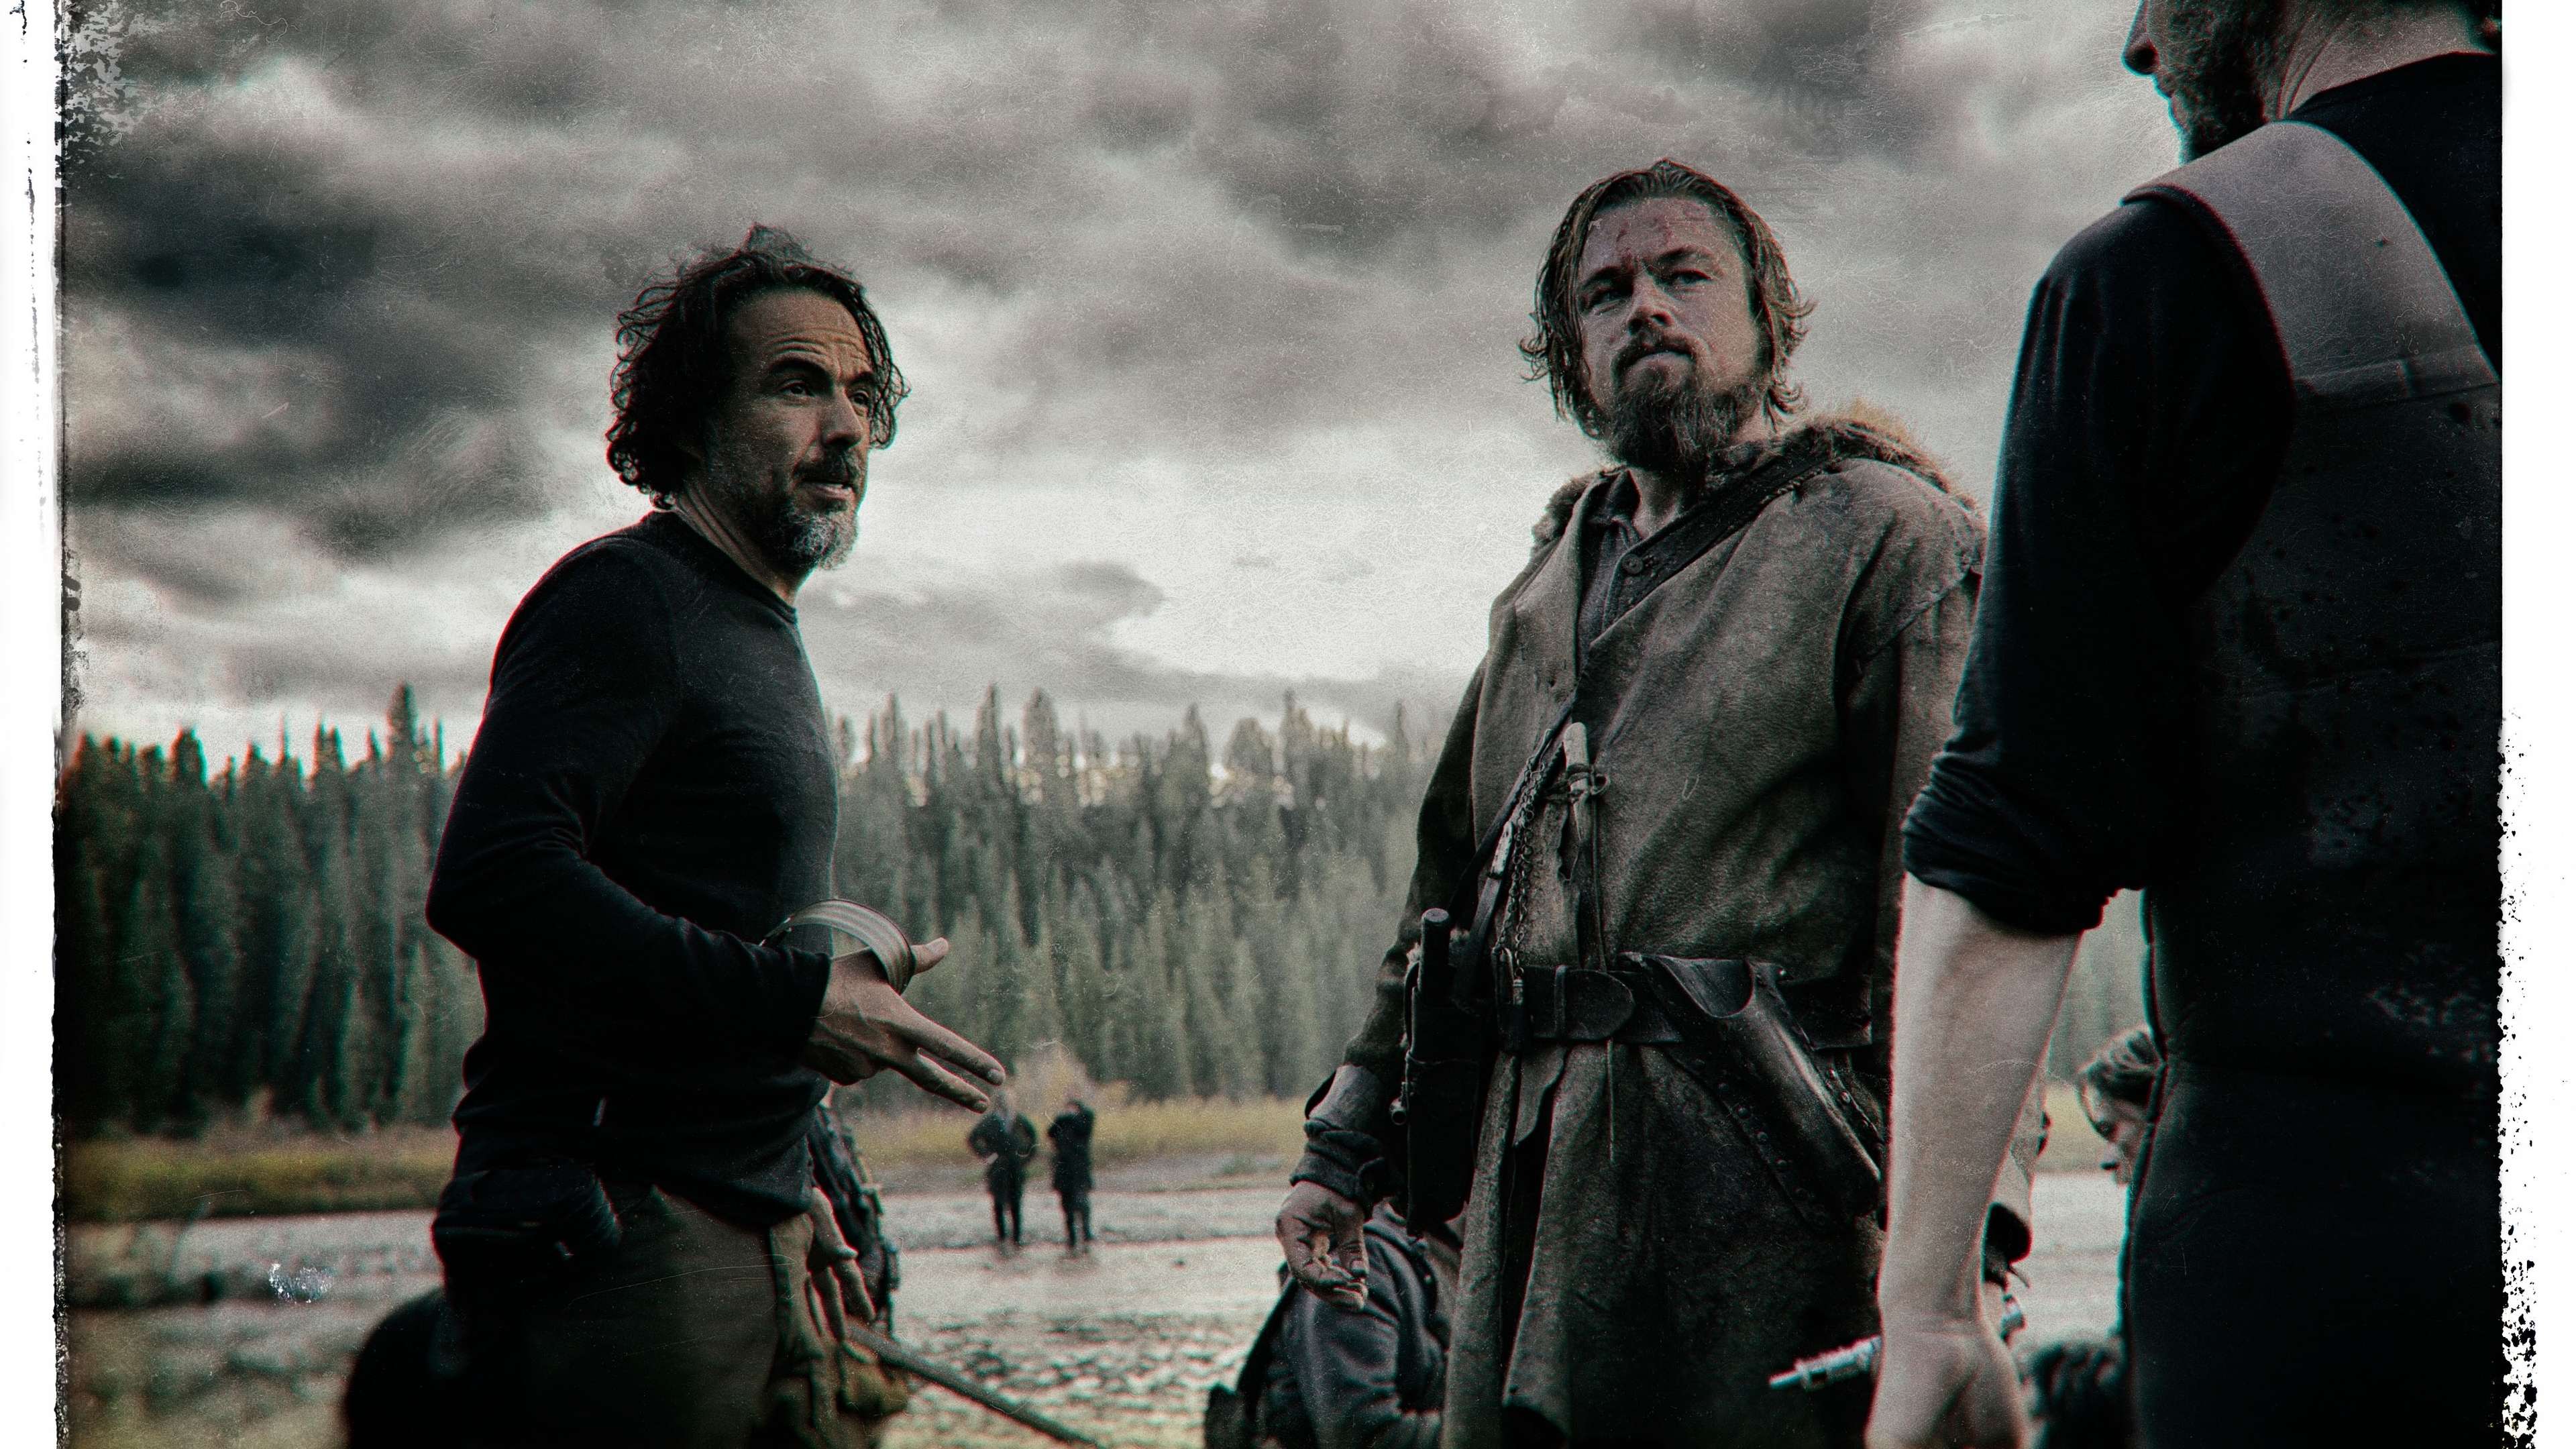 The Revenant Cast for 3840 x 2160 Ultra HD resolution